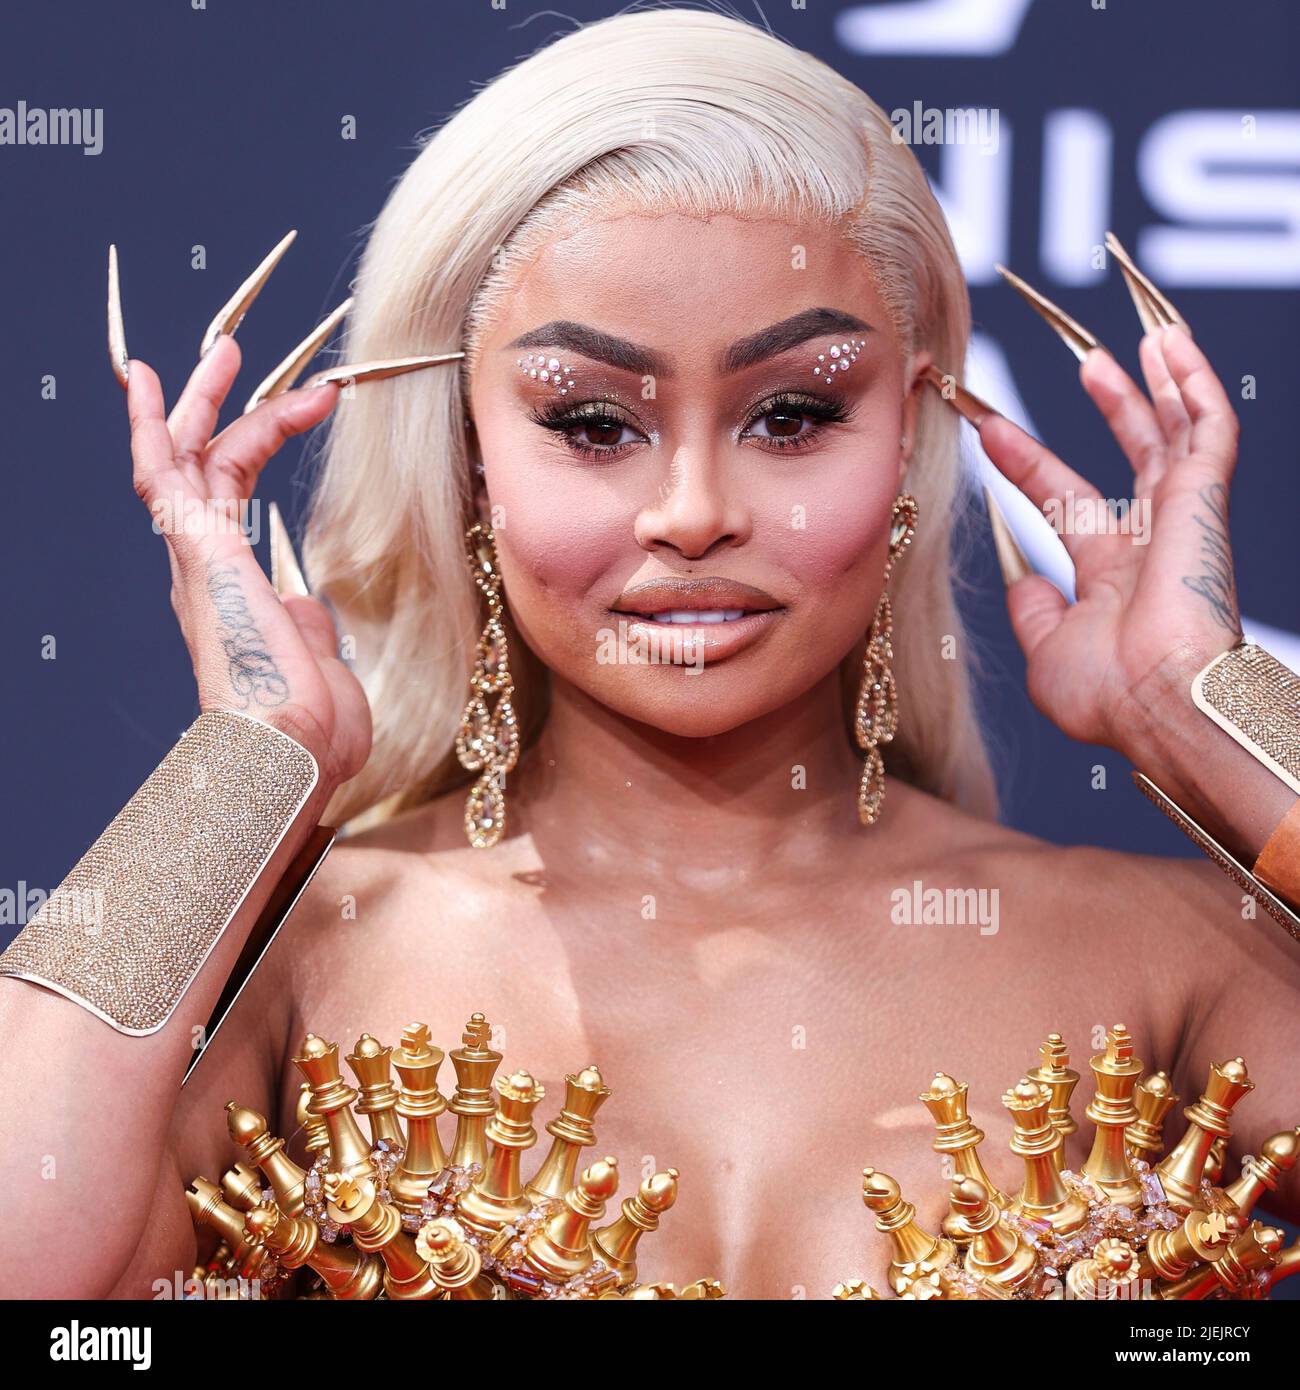 LOS ANGELES, CALIFORNIA, USA - JUNE 26: American model Blac Chyna arrives at the BET Awards 2022 held at Microsoft Theater at L.A. Live on June 26, 2022 in Los Angeles, California, United States. (Photo by Xavier Collin/Image Press Agency) Credit: Image Press Agency/Alamy Live News Stock Photo